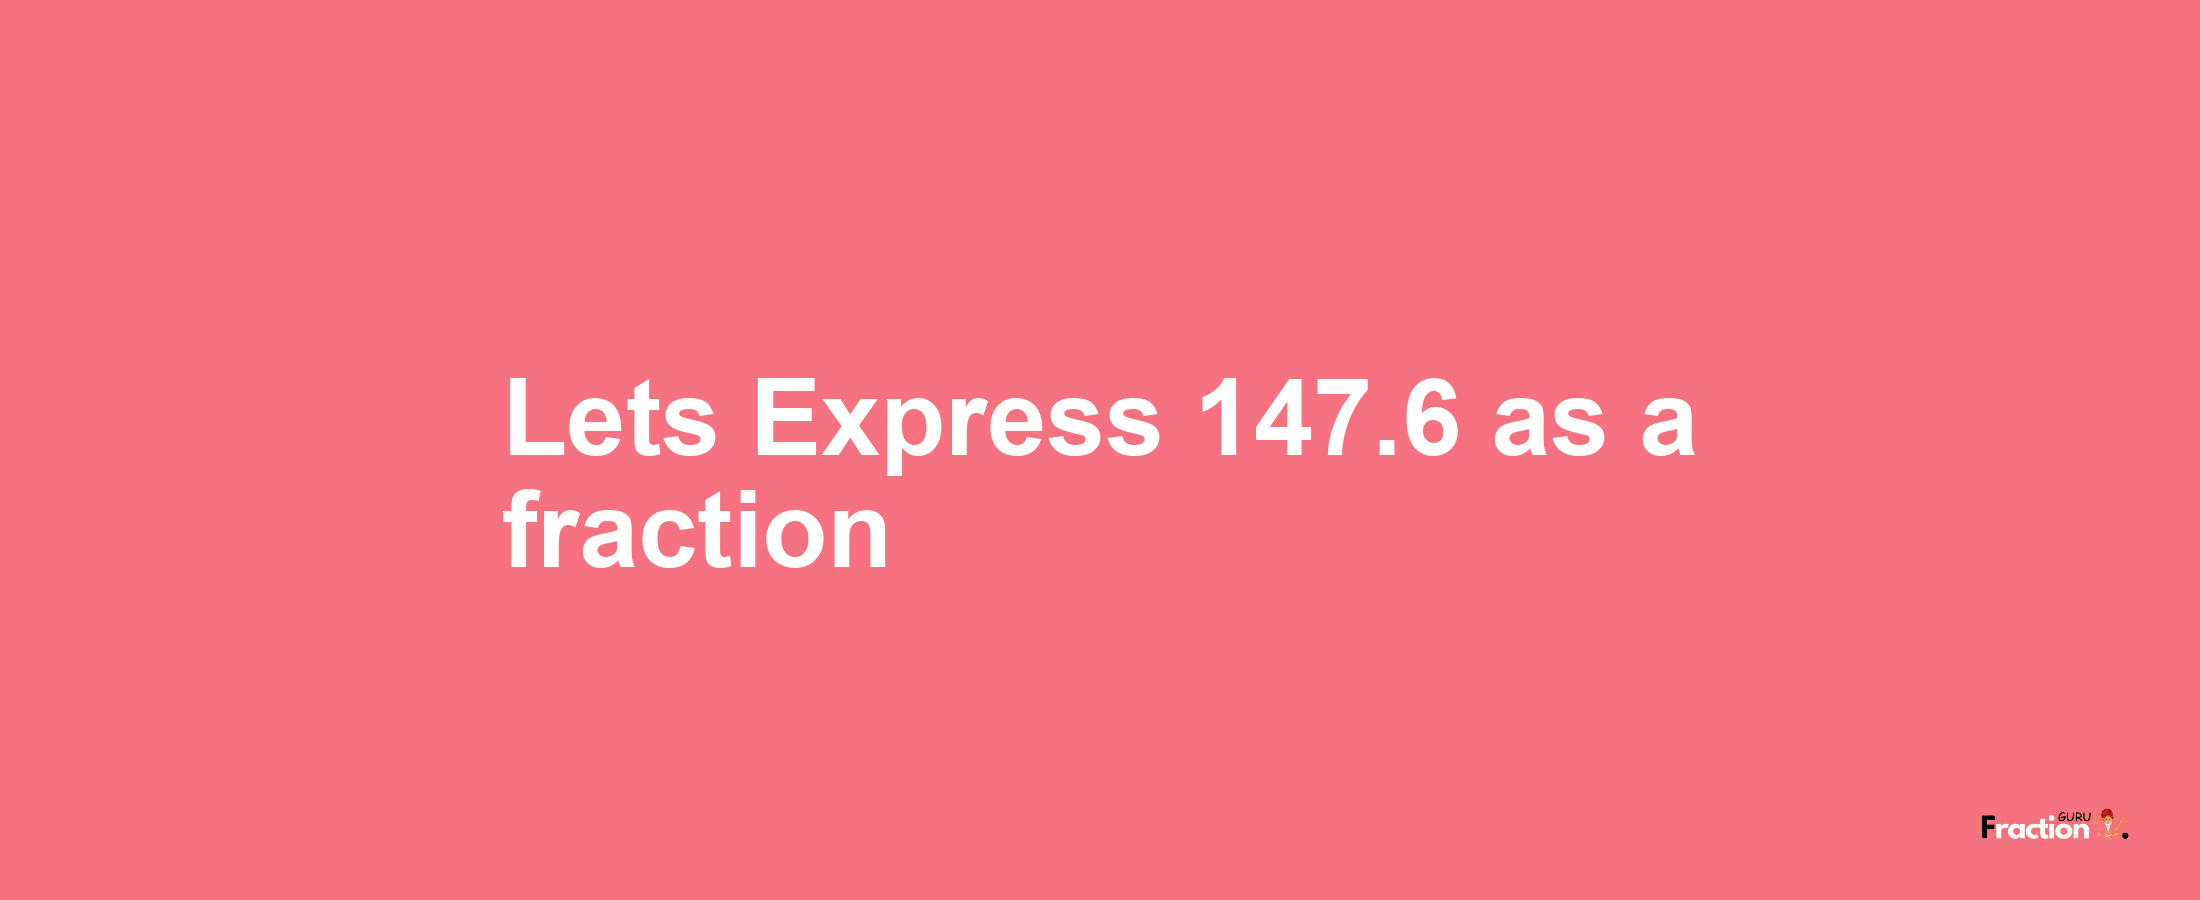 Lets Express 147.6 as afraction